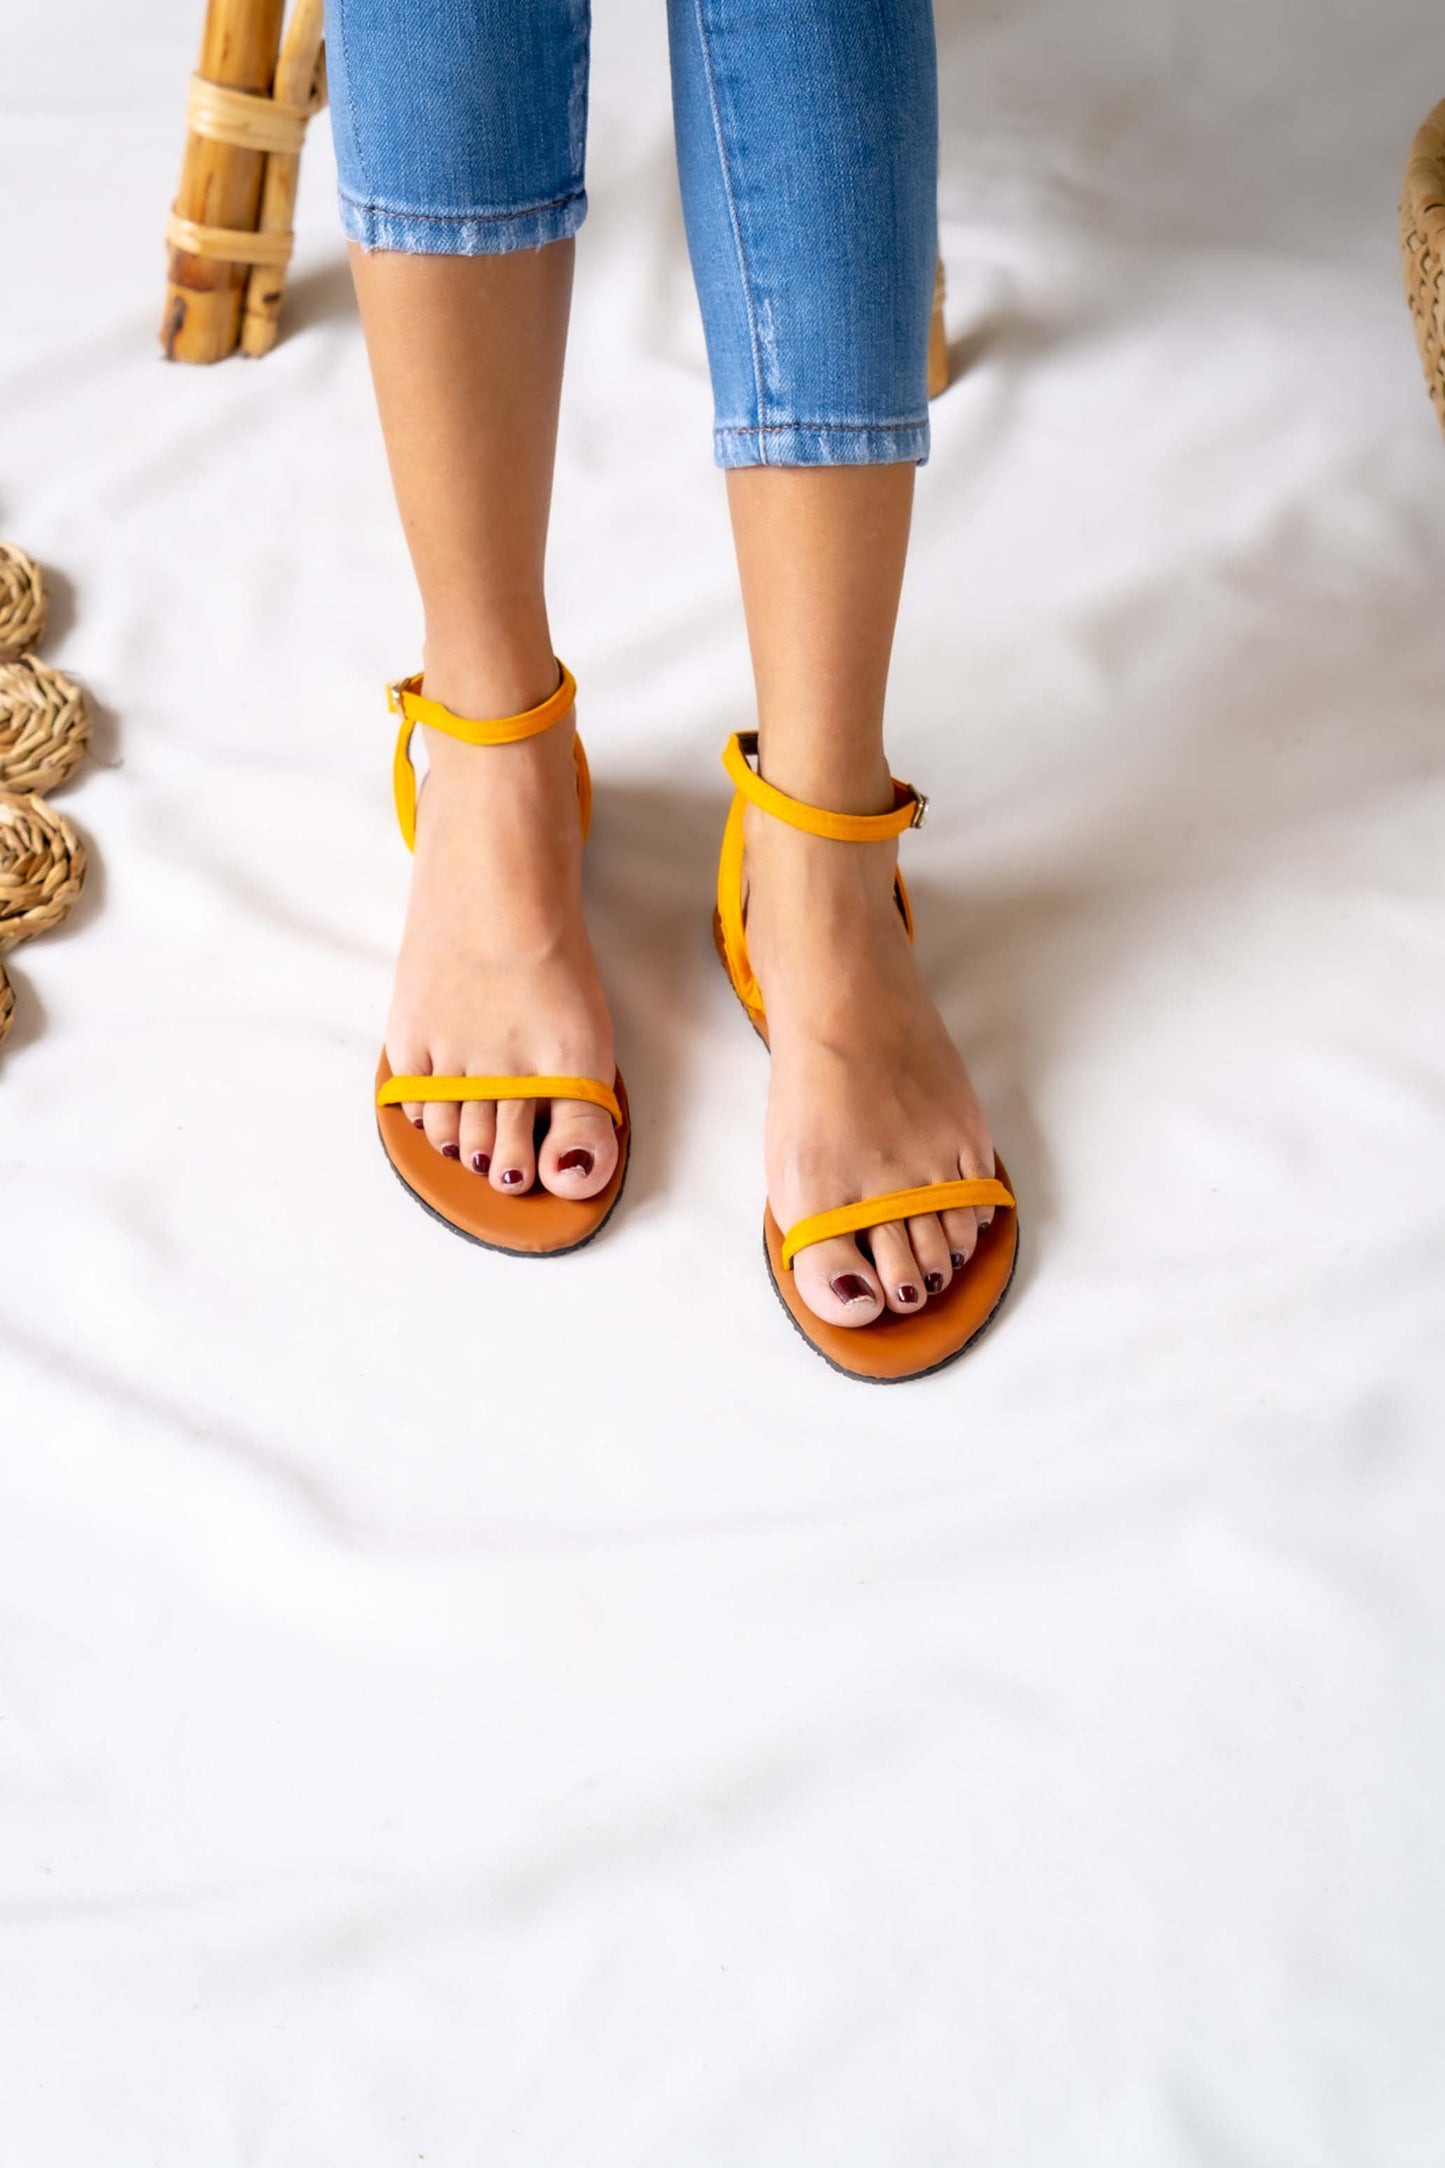 Sunny and stylish, this ladies' yellow flat sandal brings a pop of color to any outfit